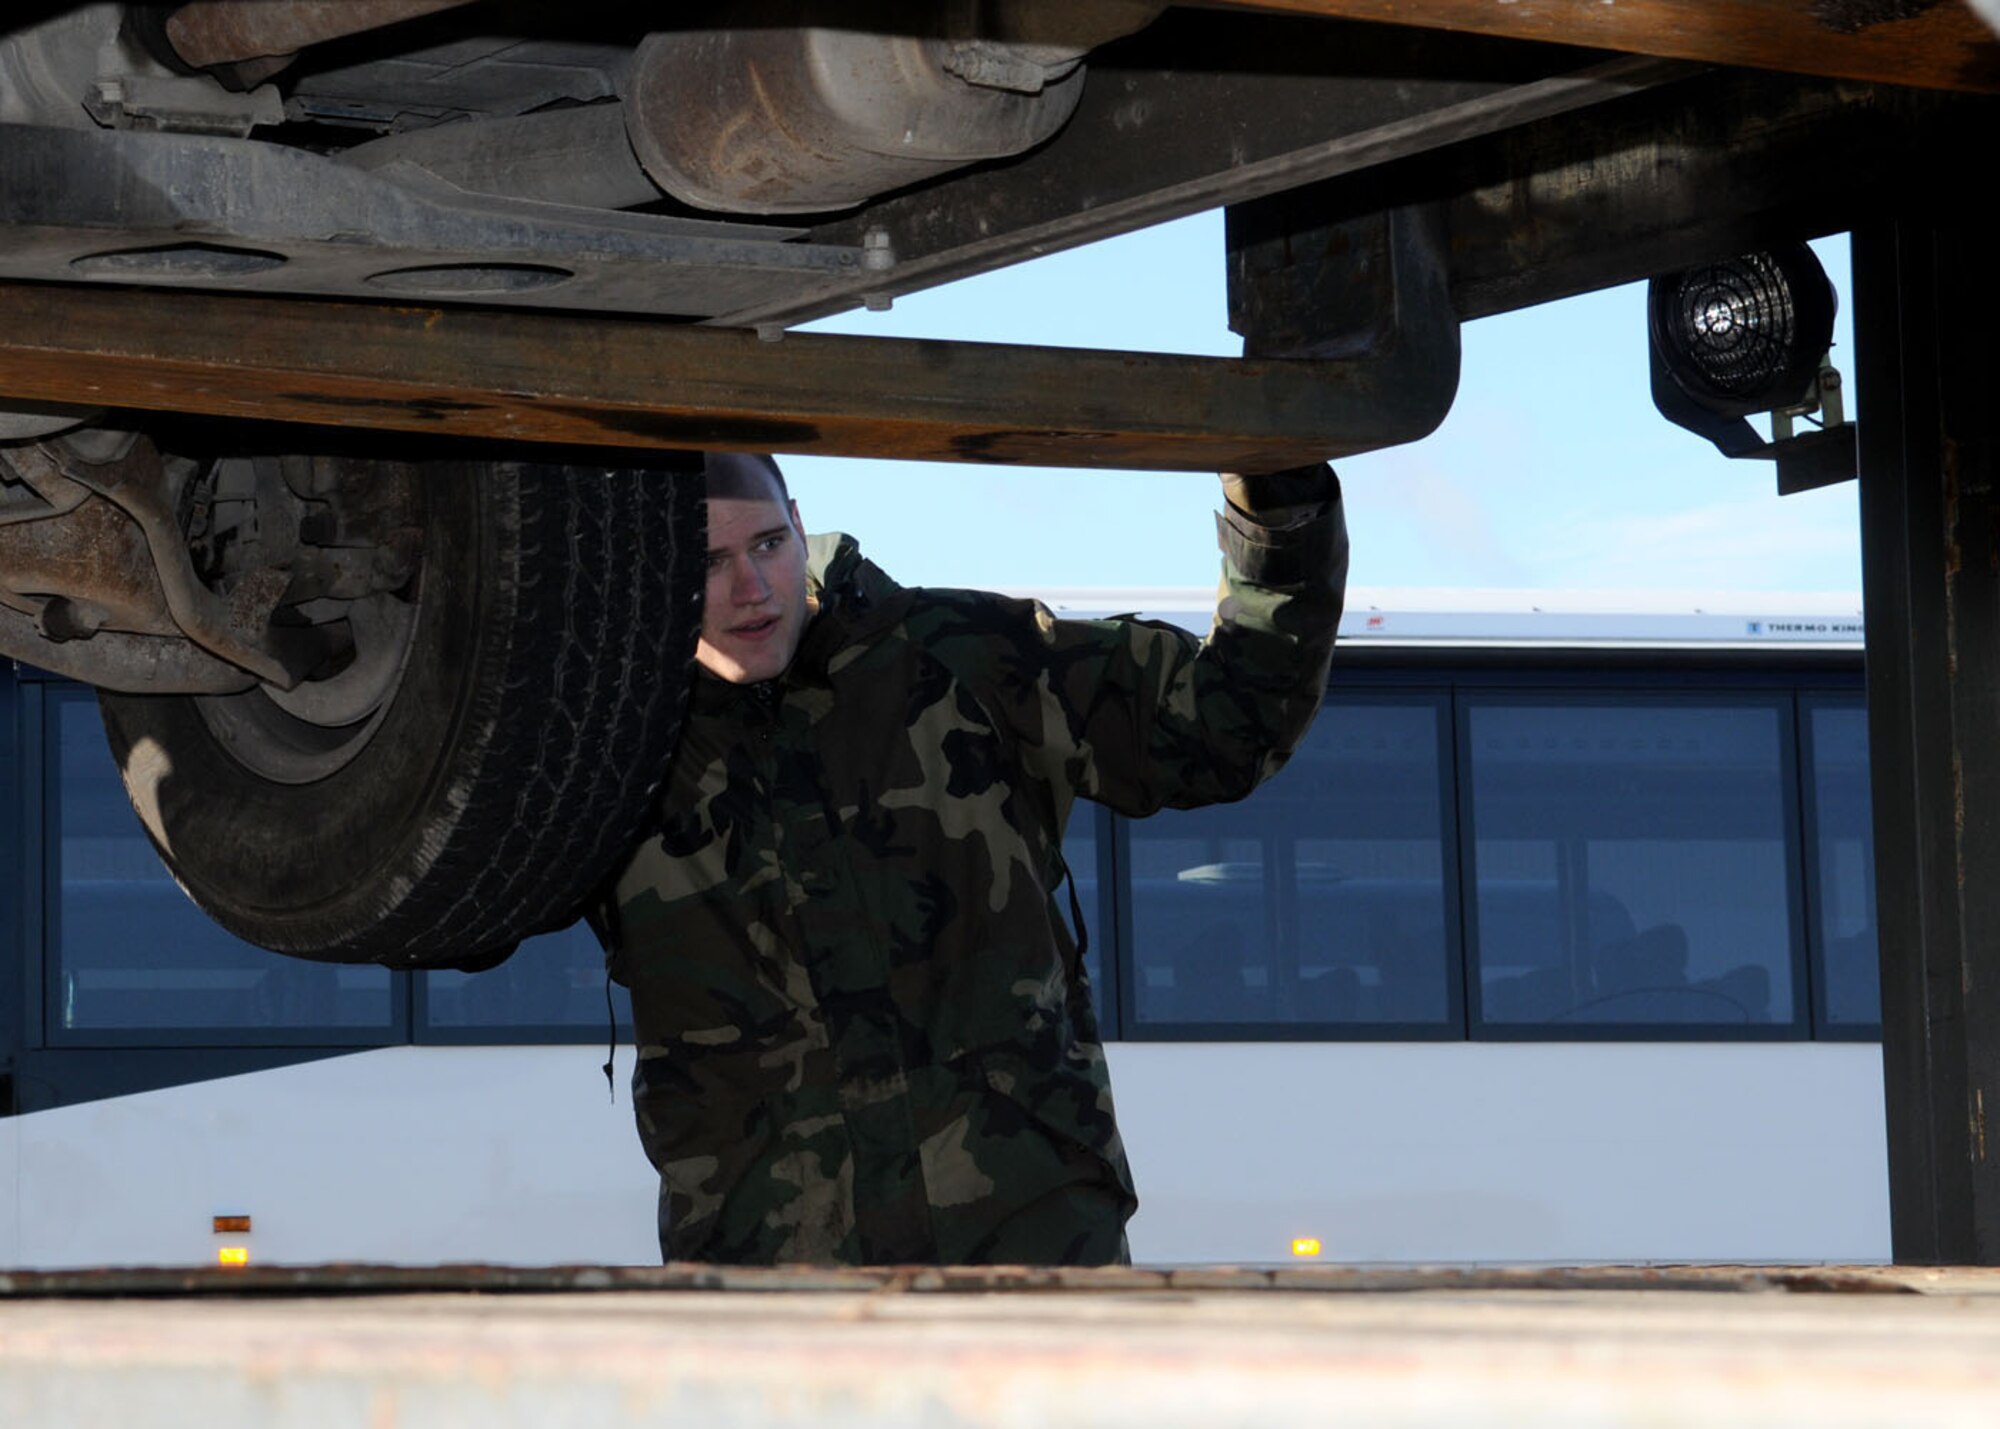 Airman 1st Class Mathew Benoit, a vehicle operator from the 100th Logistics Readiness Squadron, ensures proper clearance prior to lowering a vehicle onto a flatbed Oct. 27, 2008. The vehicle was being turned into the Defense Reutilization Marketing Office (DRMO) after years of military use. (U.S. Air Force photo by Staff Sgt. Jerry Fleshman)